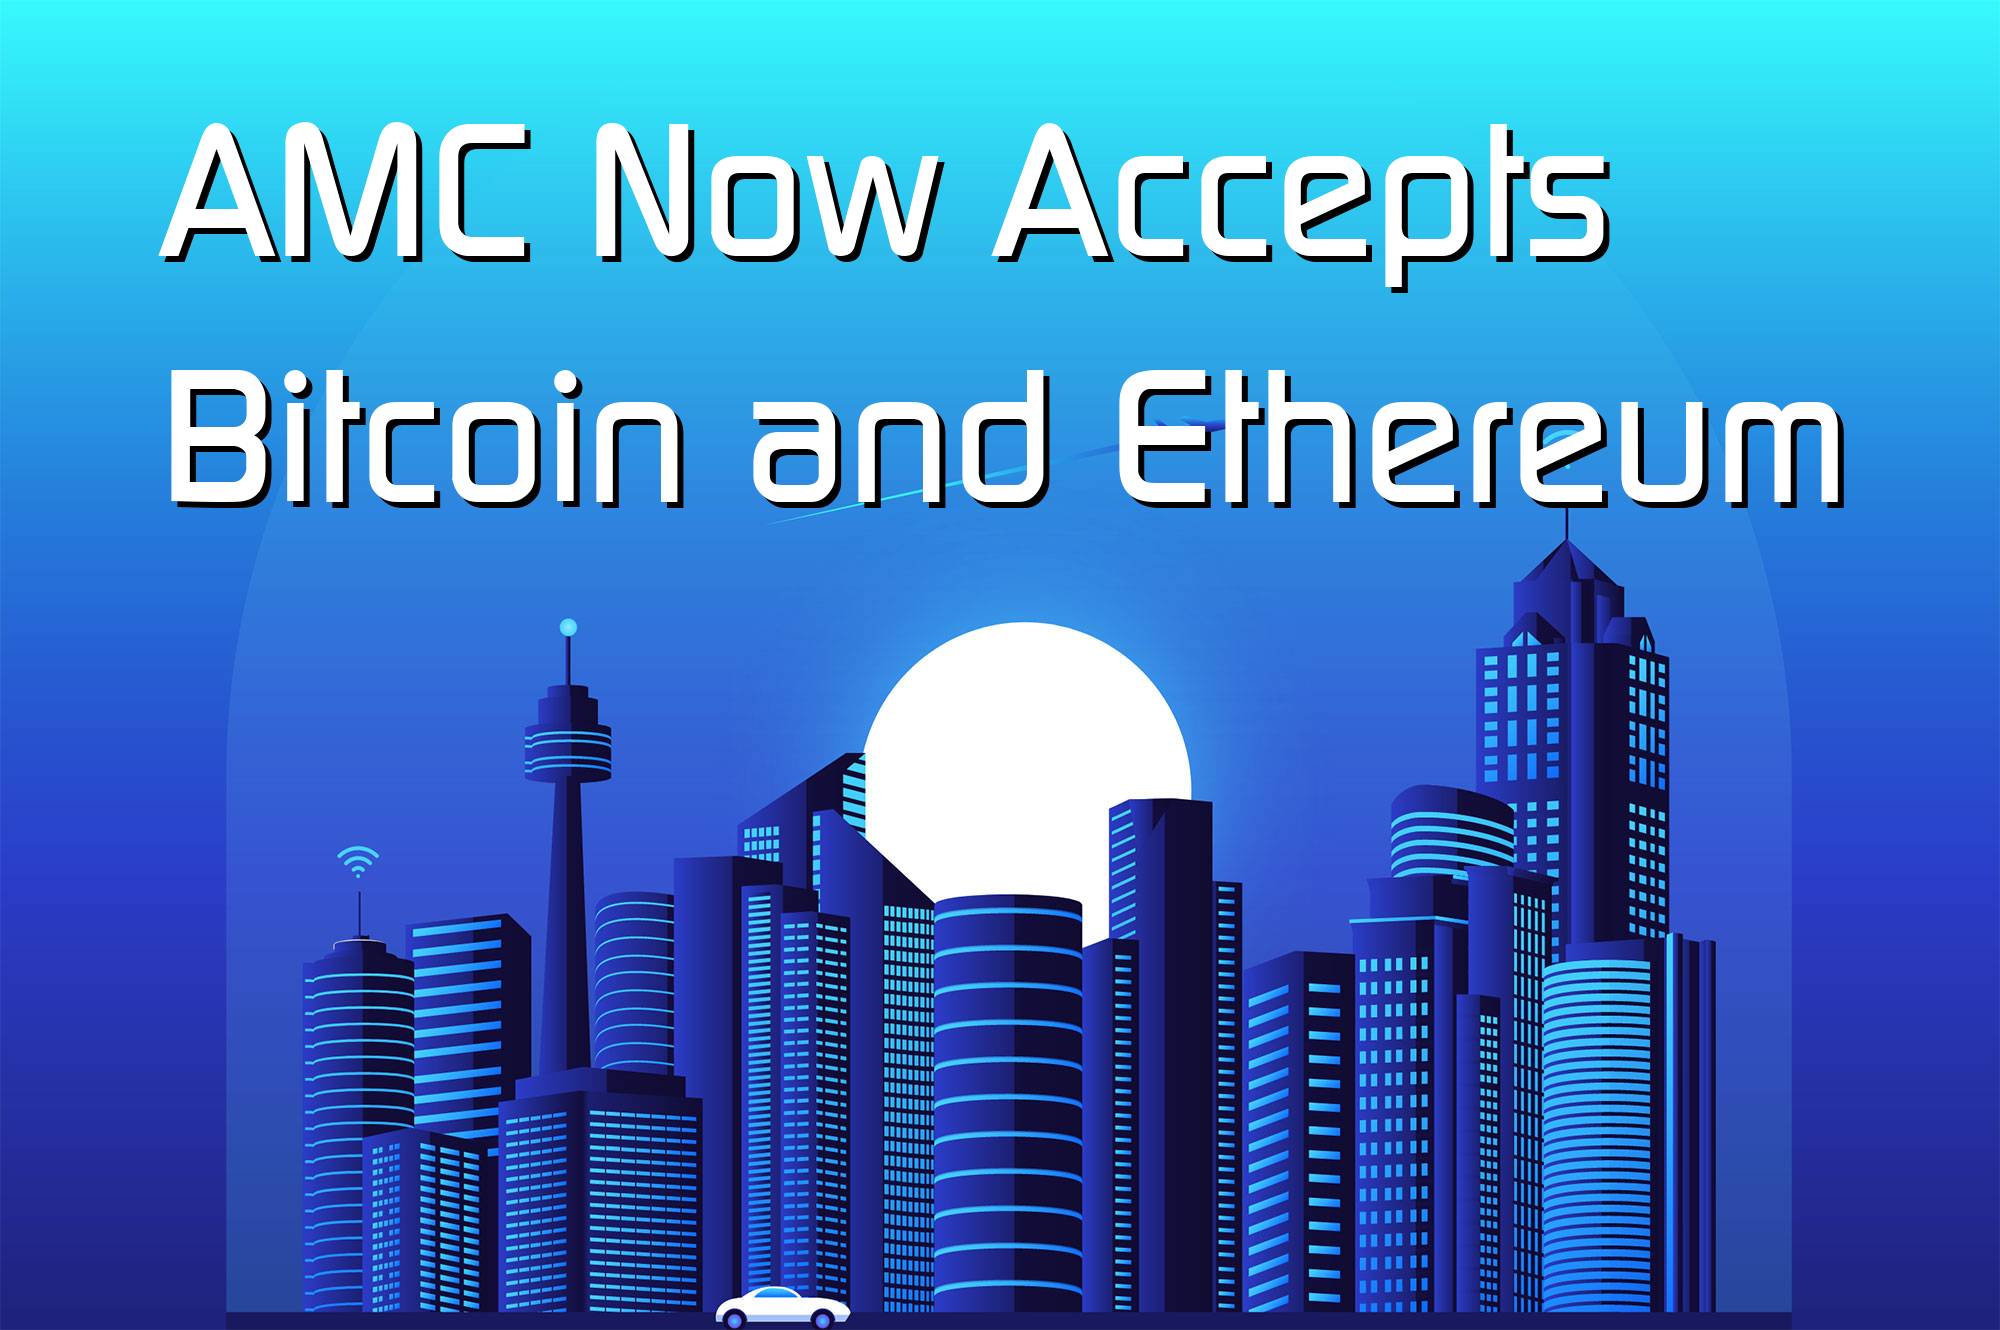 @$63014: AMC Now Accepts Bitcoin and Ethereum